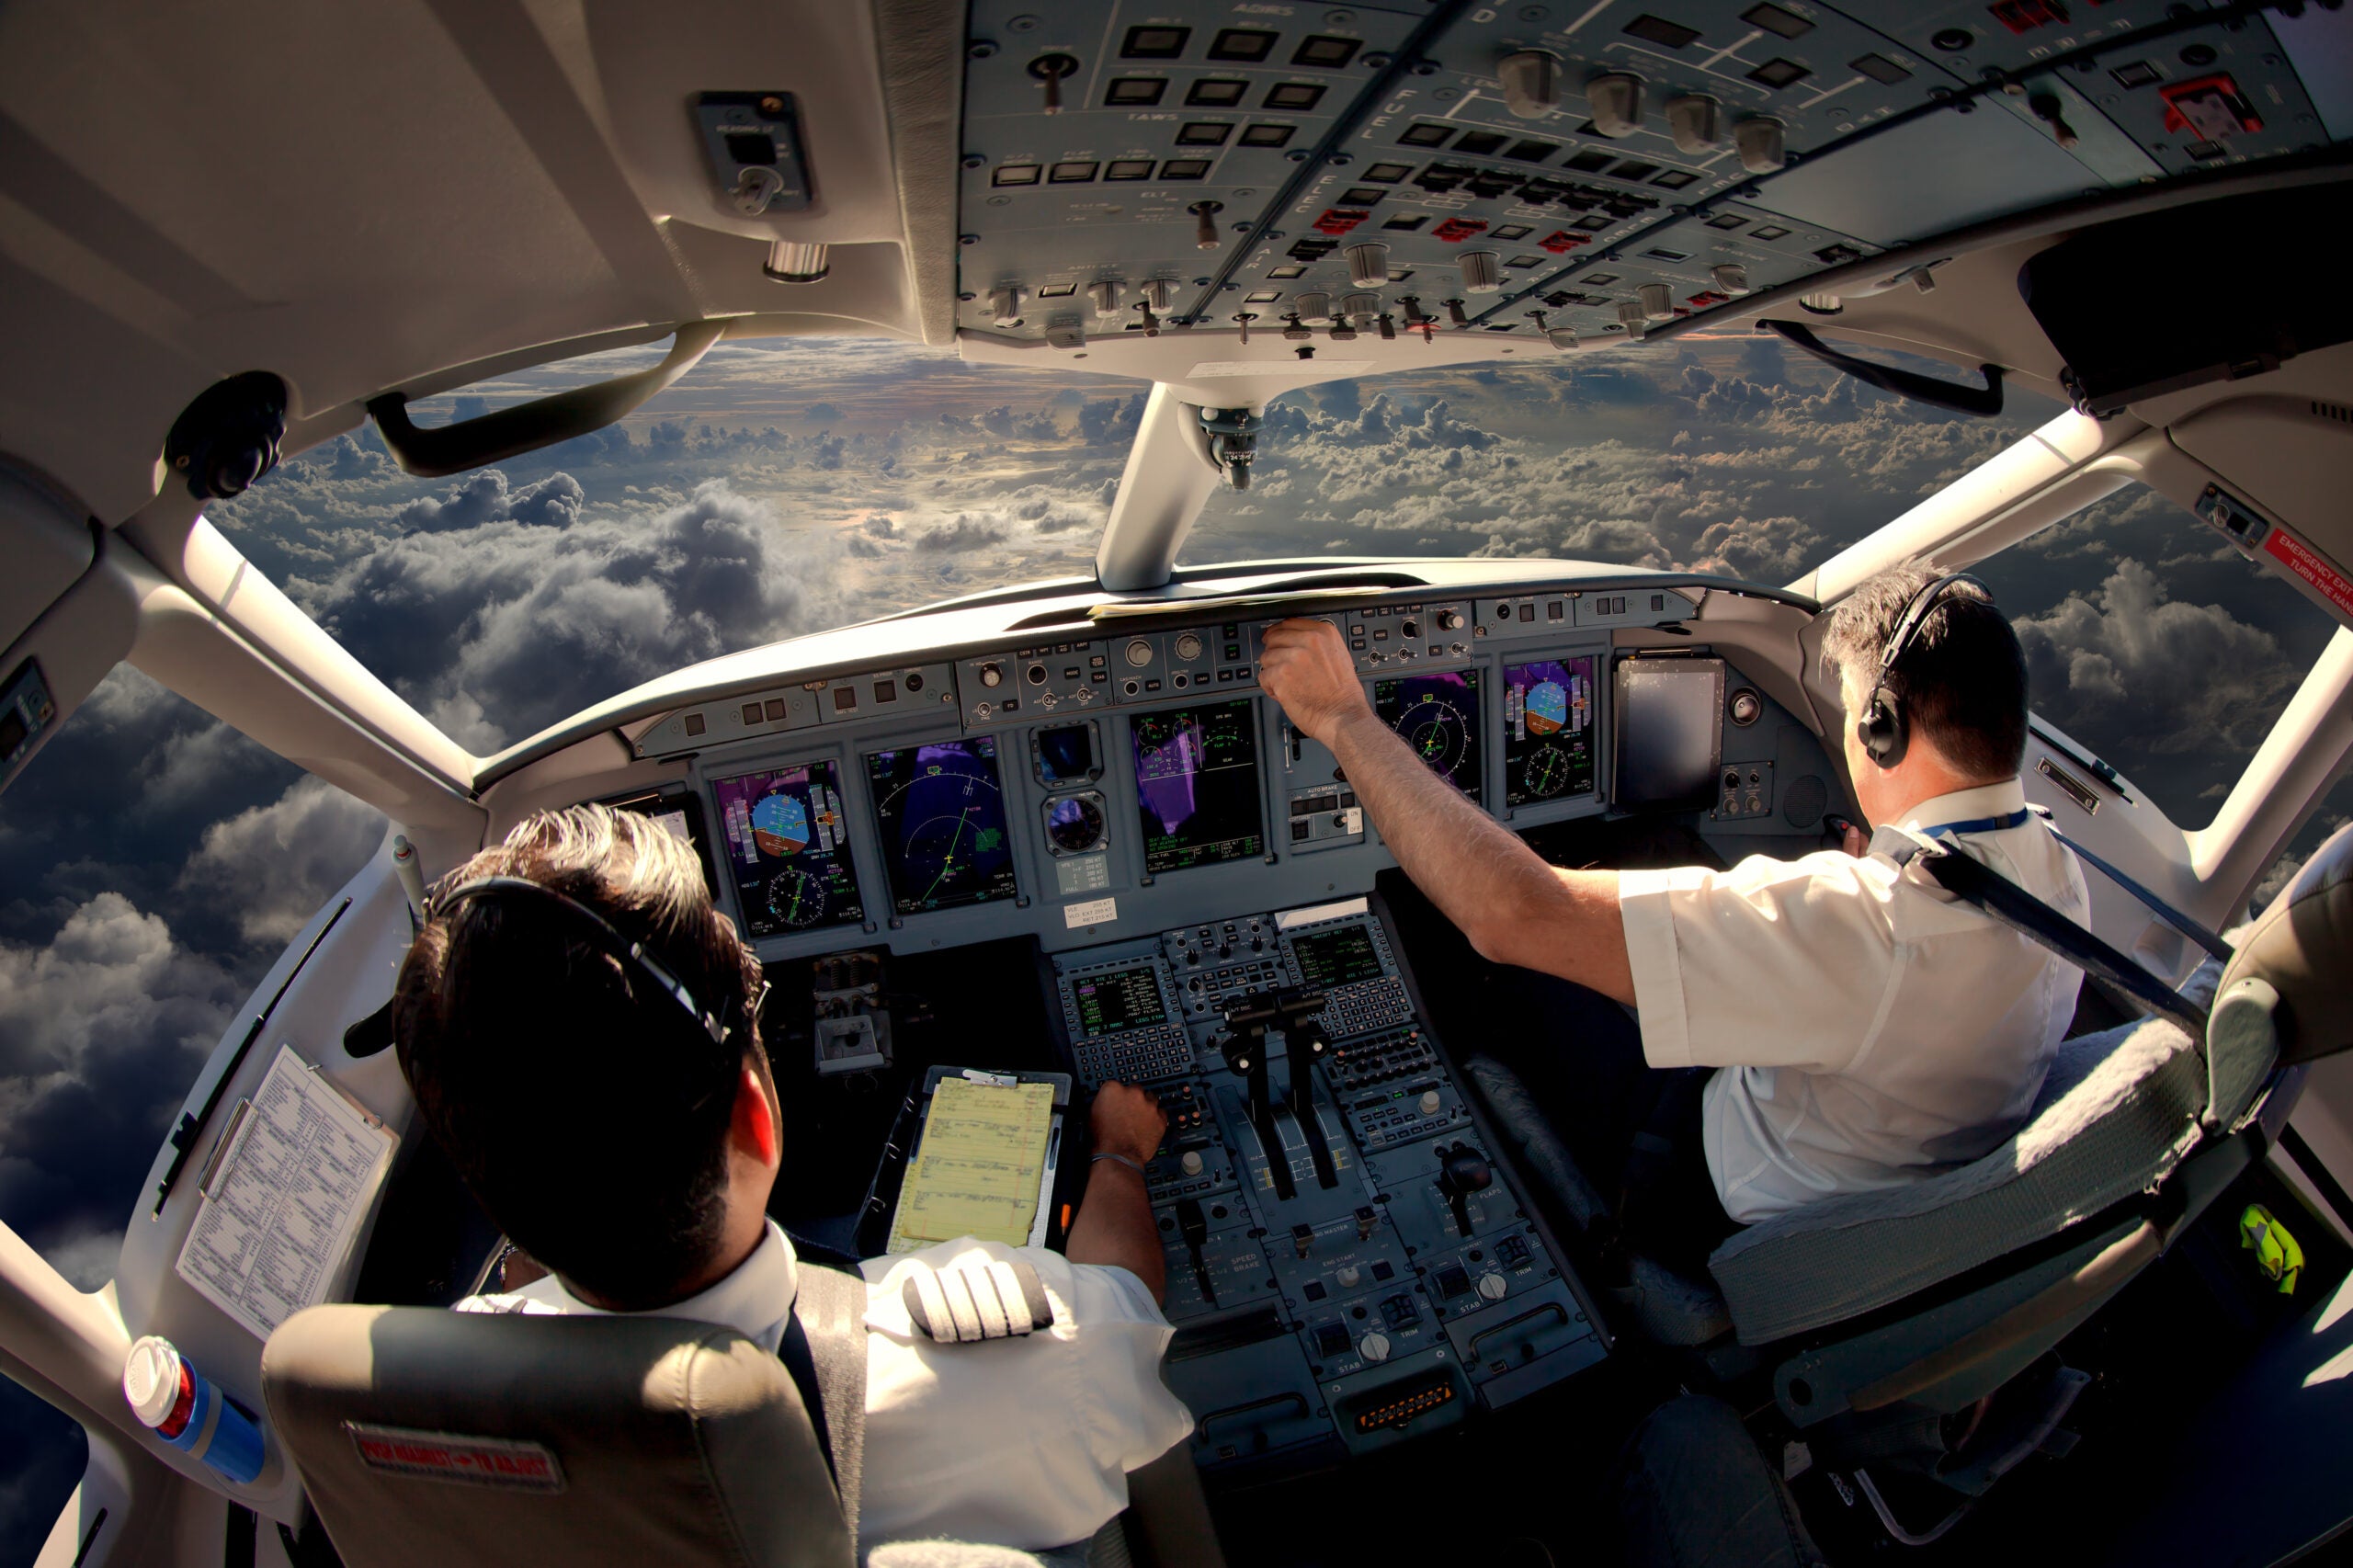 Comparing Currency: GA Pilots vs. Airline Pilots